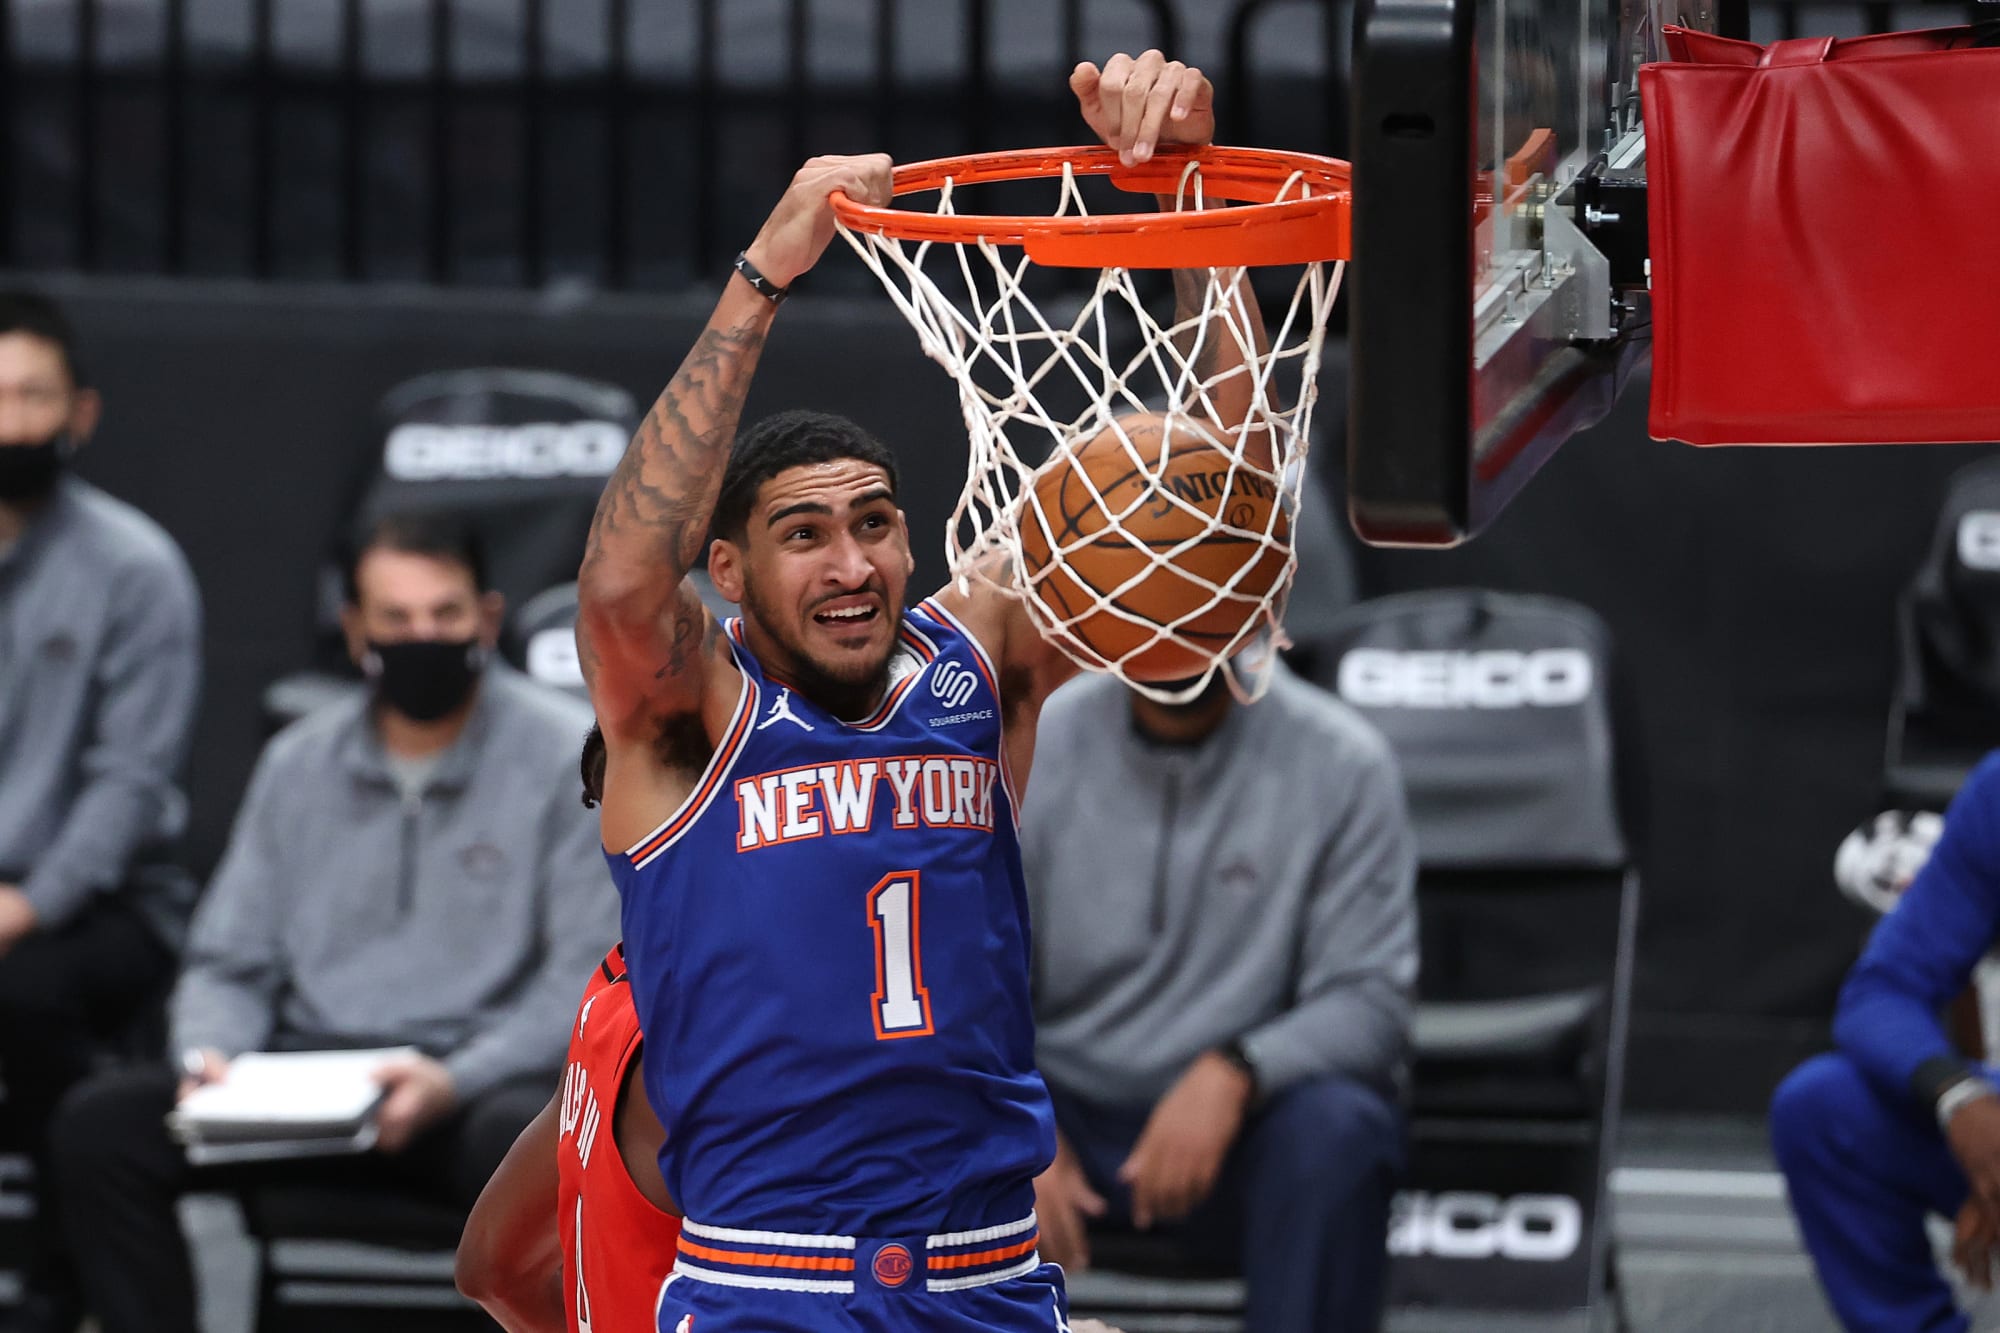 Knicks: This is Obi Toppin's chance to show "Special Talent"